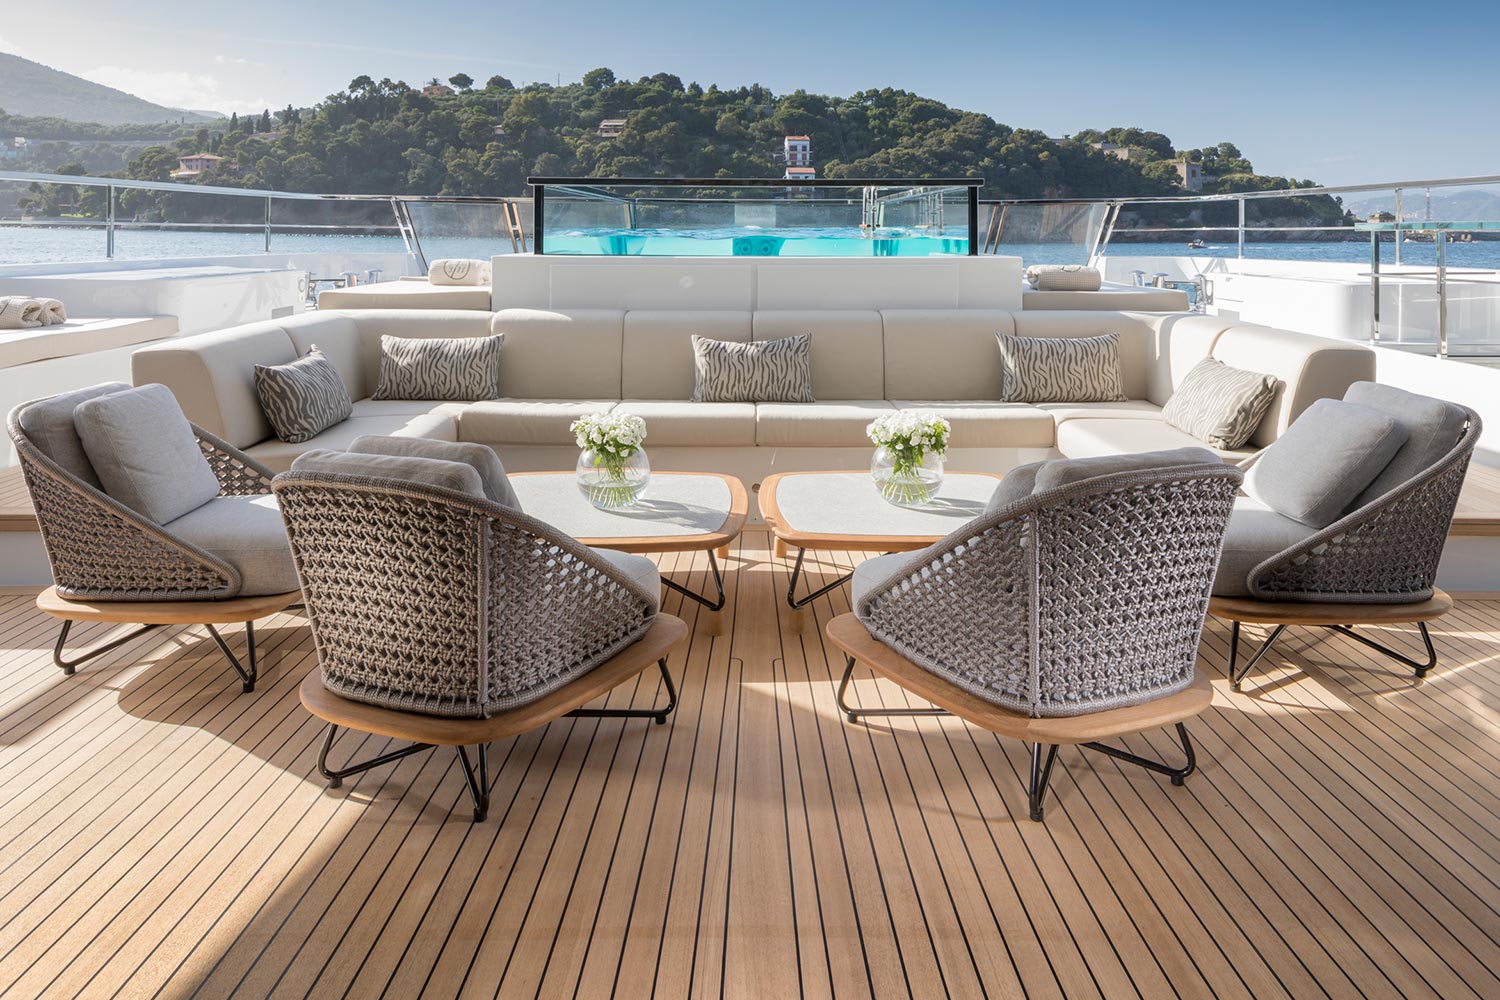 Luxury Yacht SEVEN SINS - Main Deck Aft Lounging Area Beside Pool